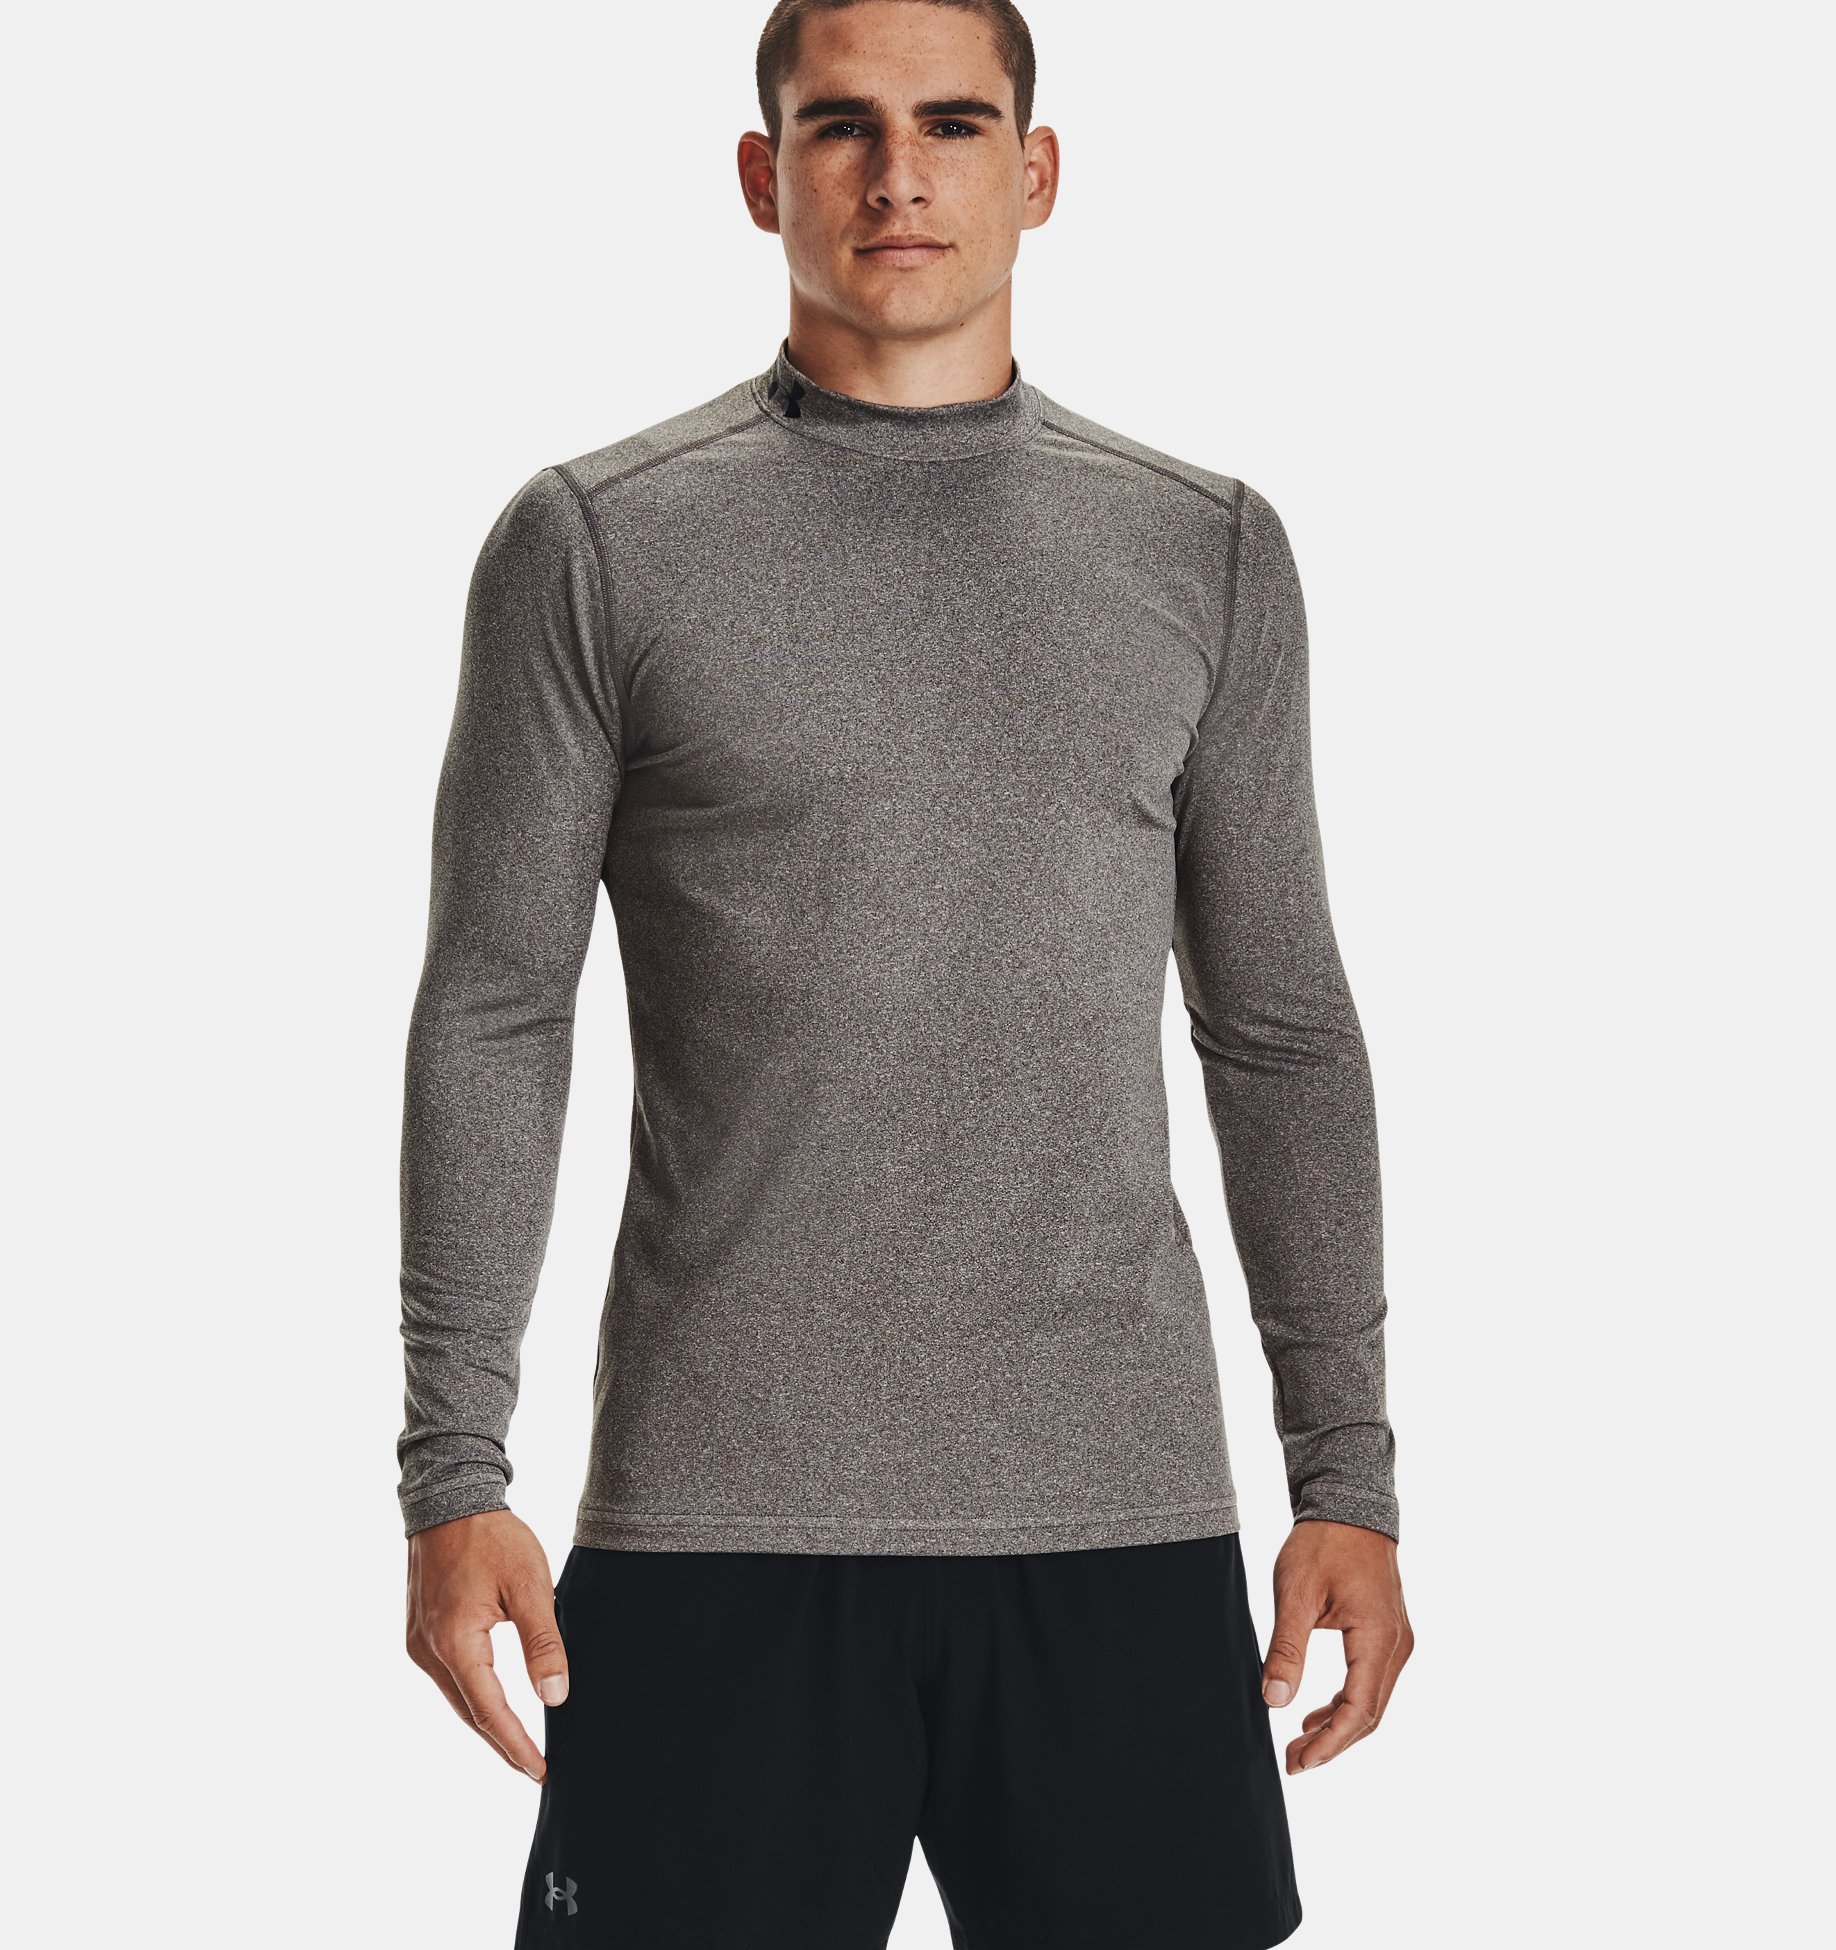 Under Armour Mens ColdGear Fitted Crew Long Sleeve T-Shirt